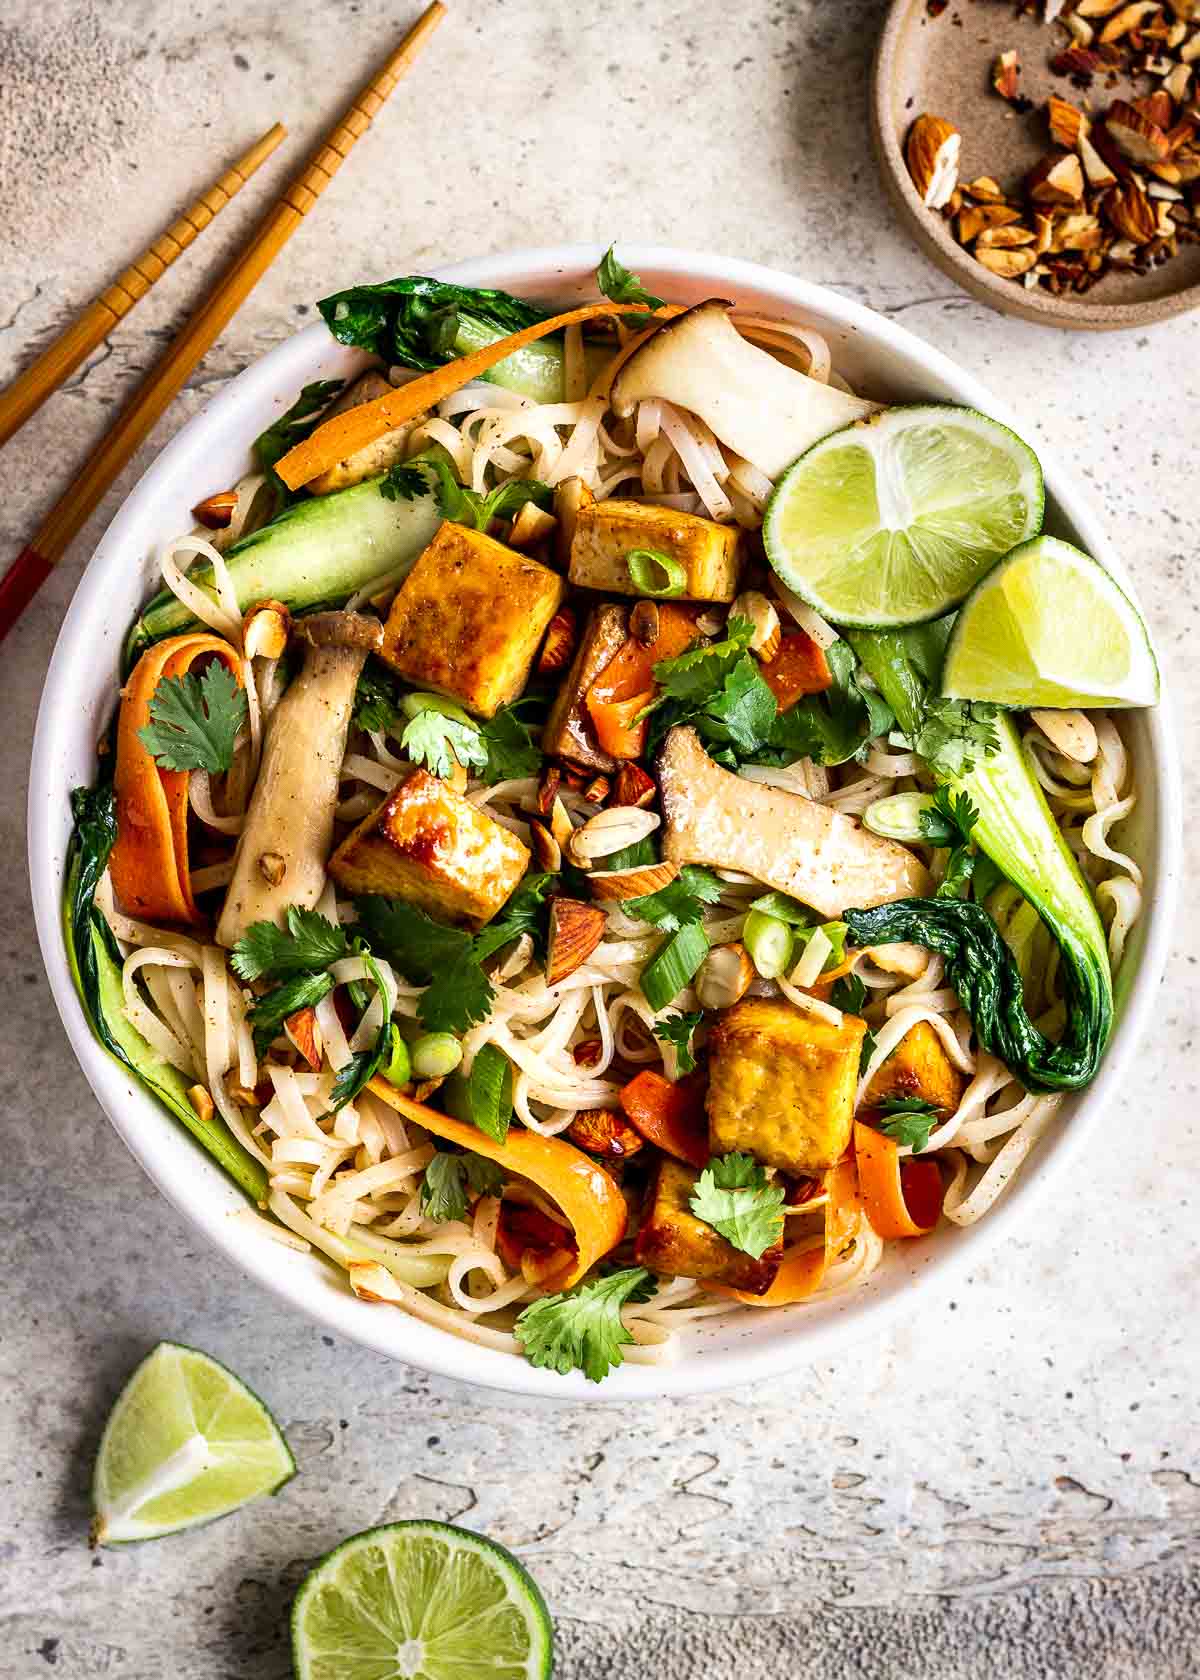 A bowl of vegan noodles with almond butter, tofu and vegetables.